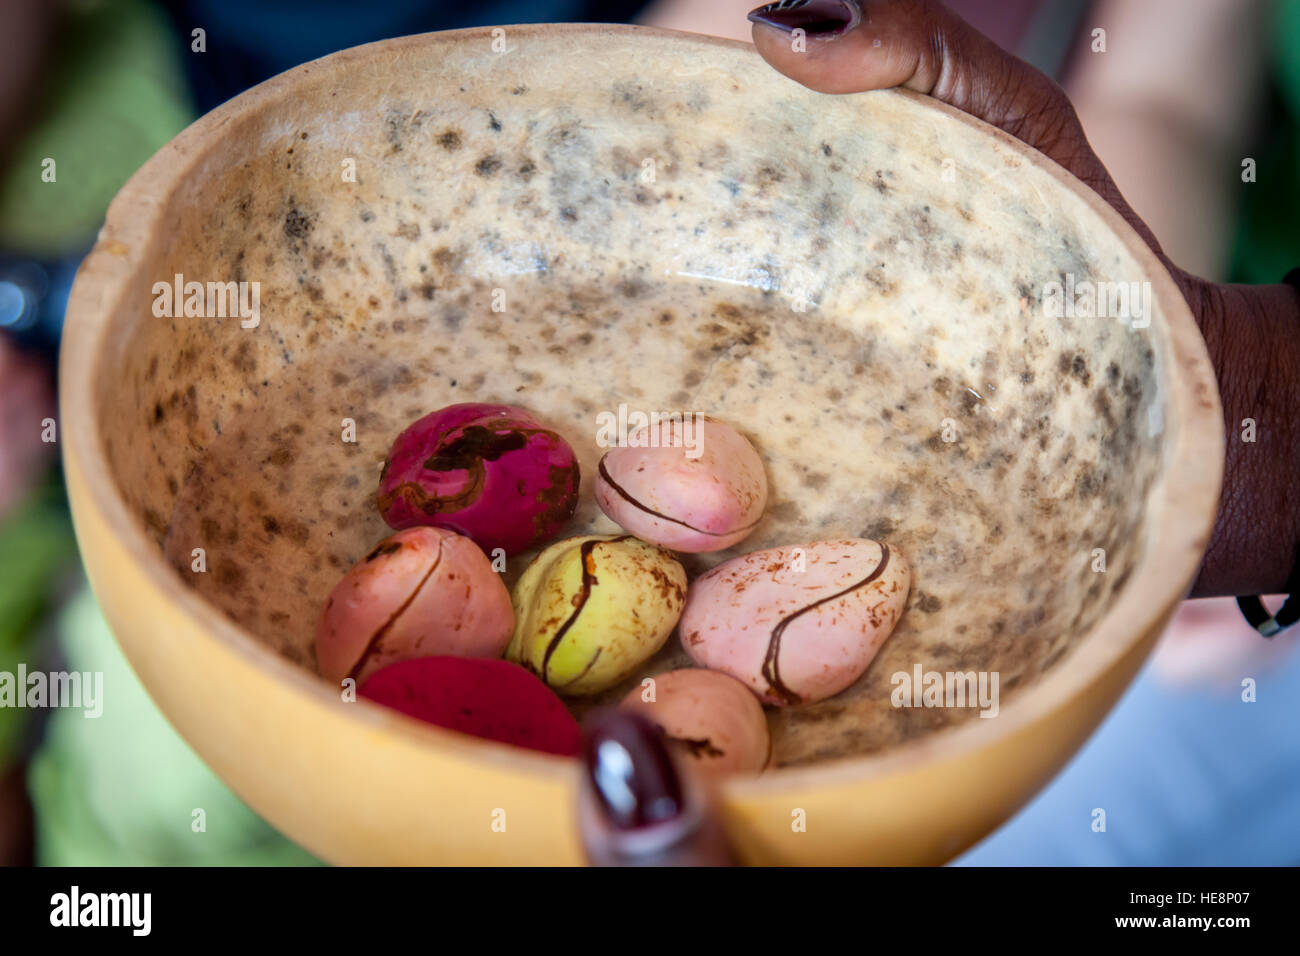 Kola nuts in a bowl of water are an important part of the welcoming ceremony in the Wara Wara Yagala chiefdom in Sierra Leone Stock Photo